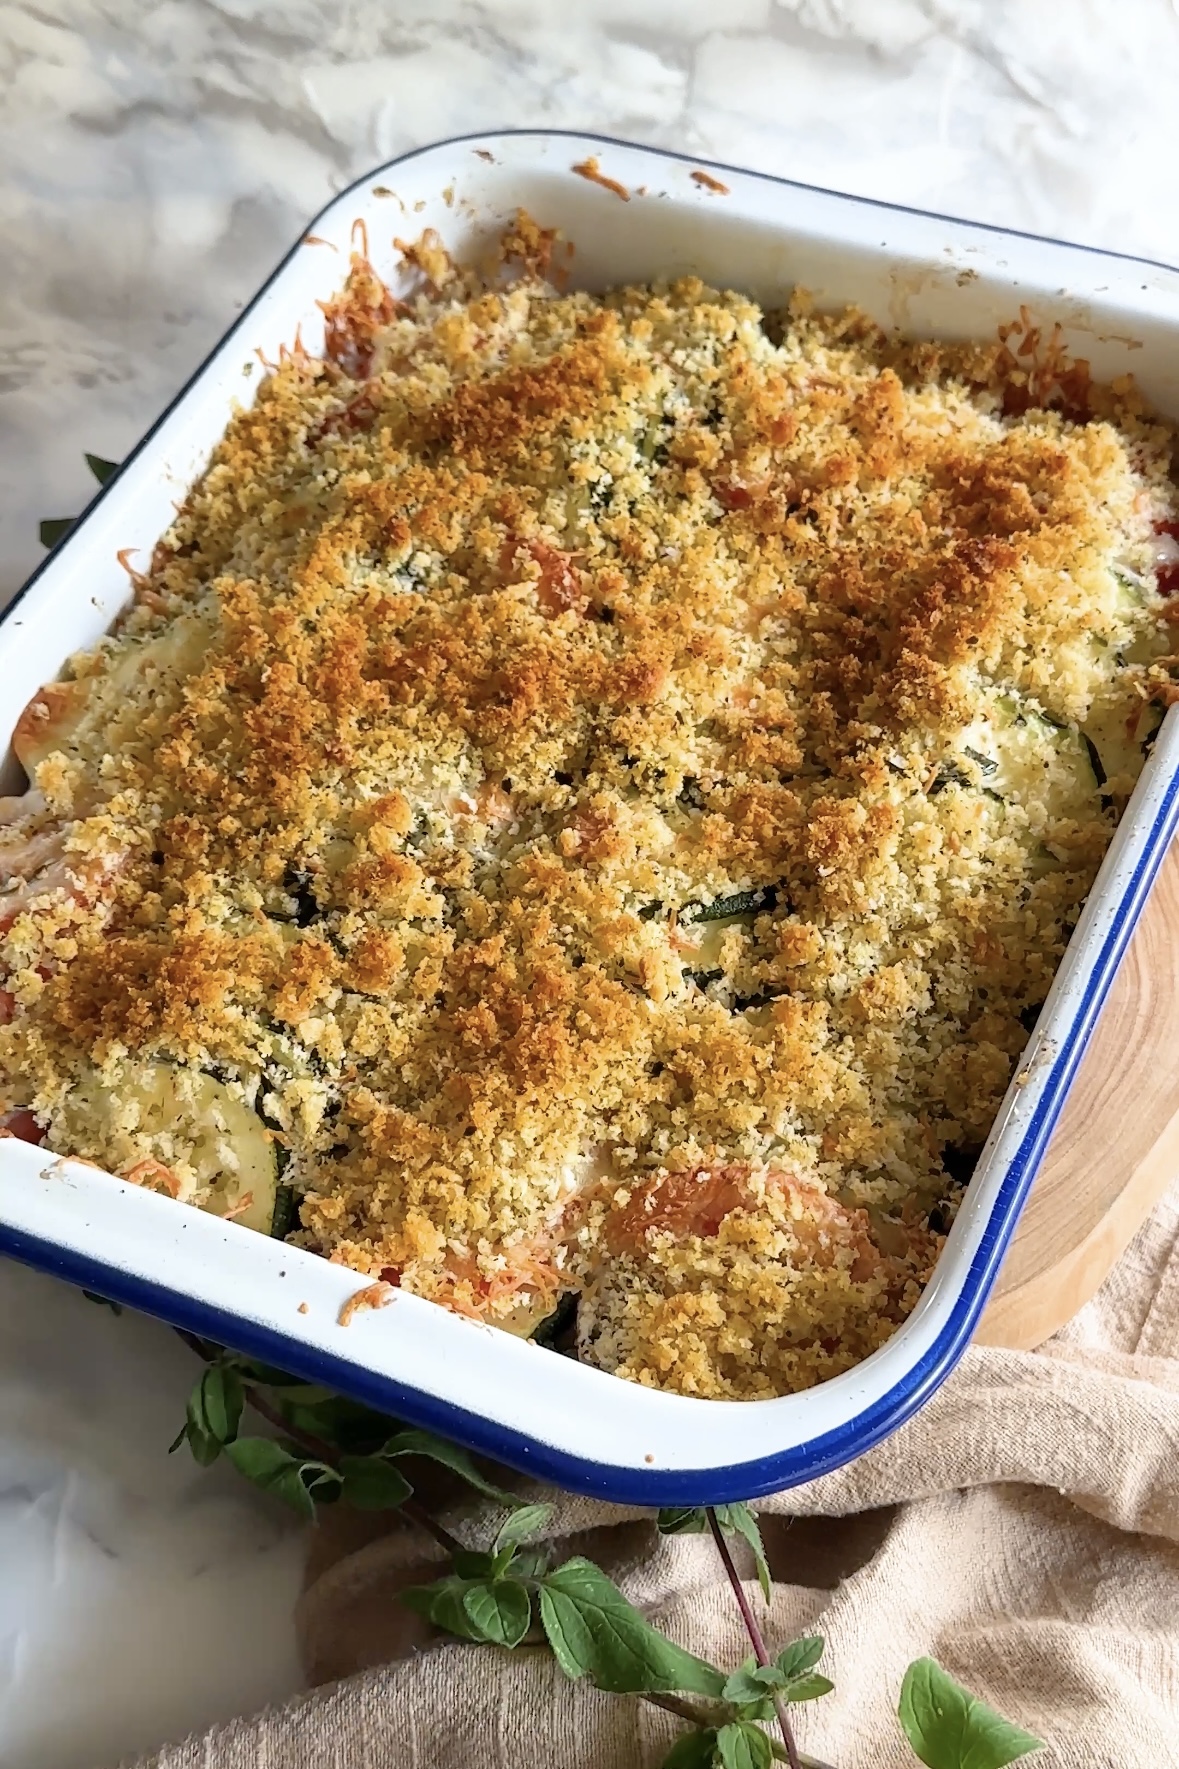 A baked casserole in a baking dish topped with browned bread crumbs.